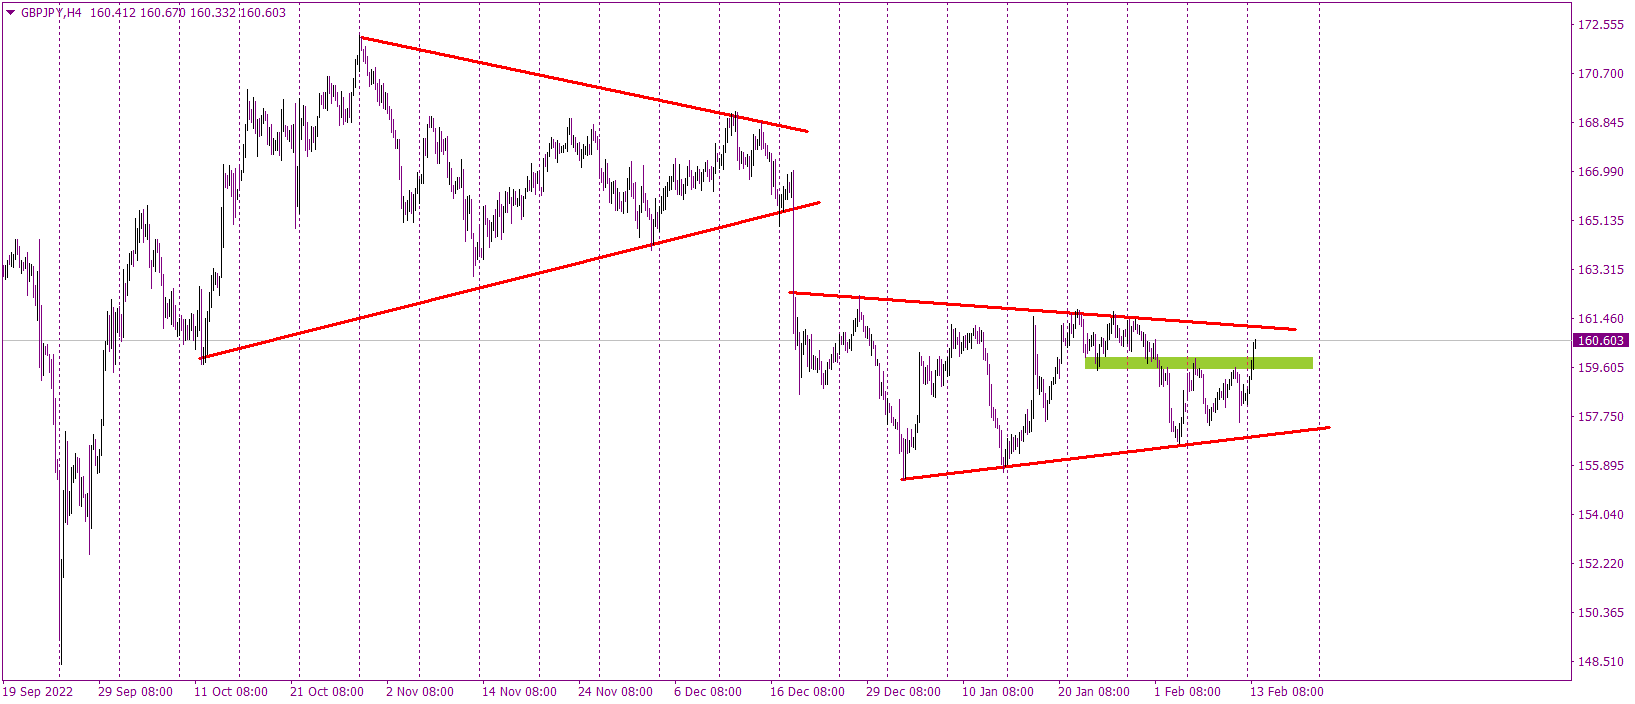 GBPJPY aims at triangle upper line